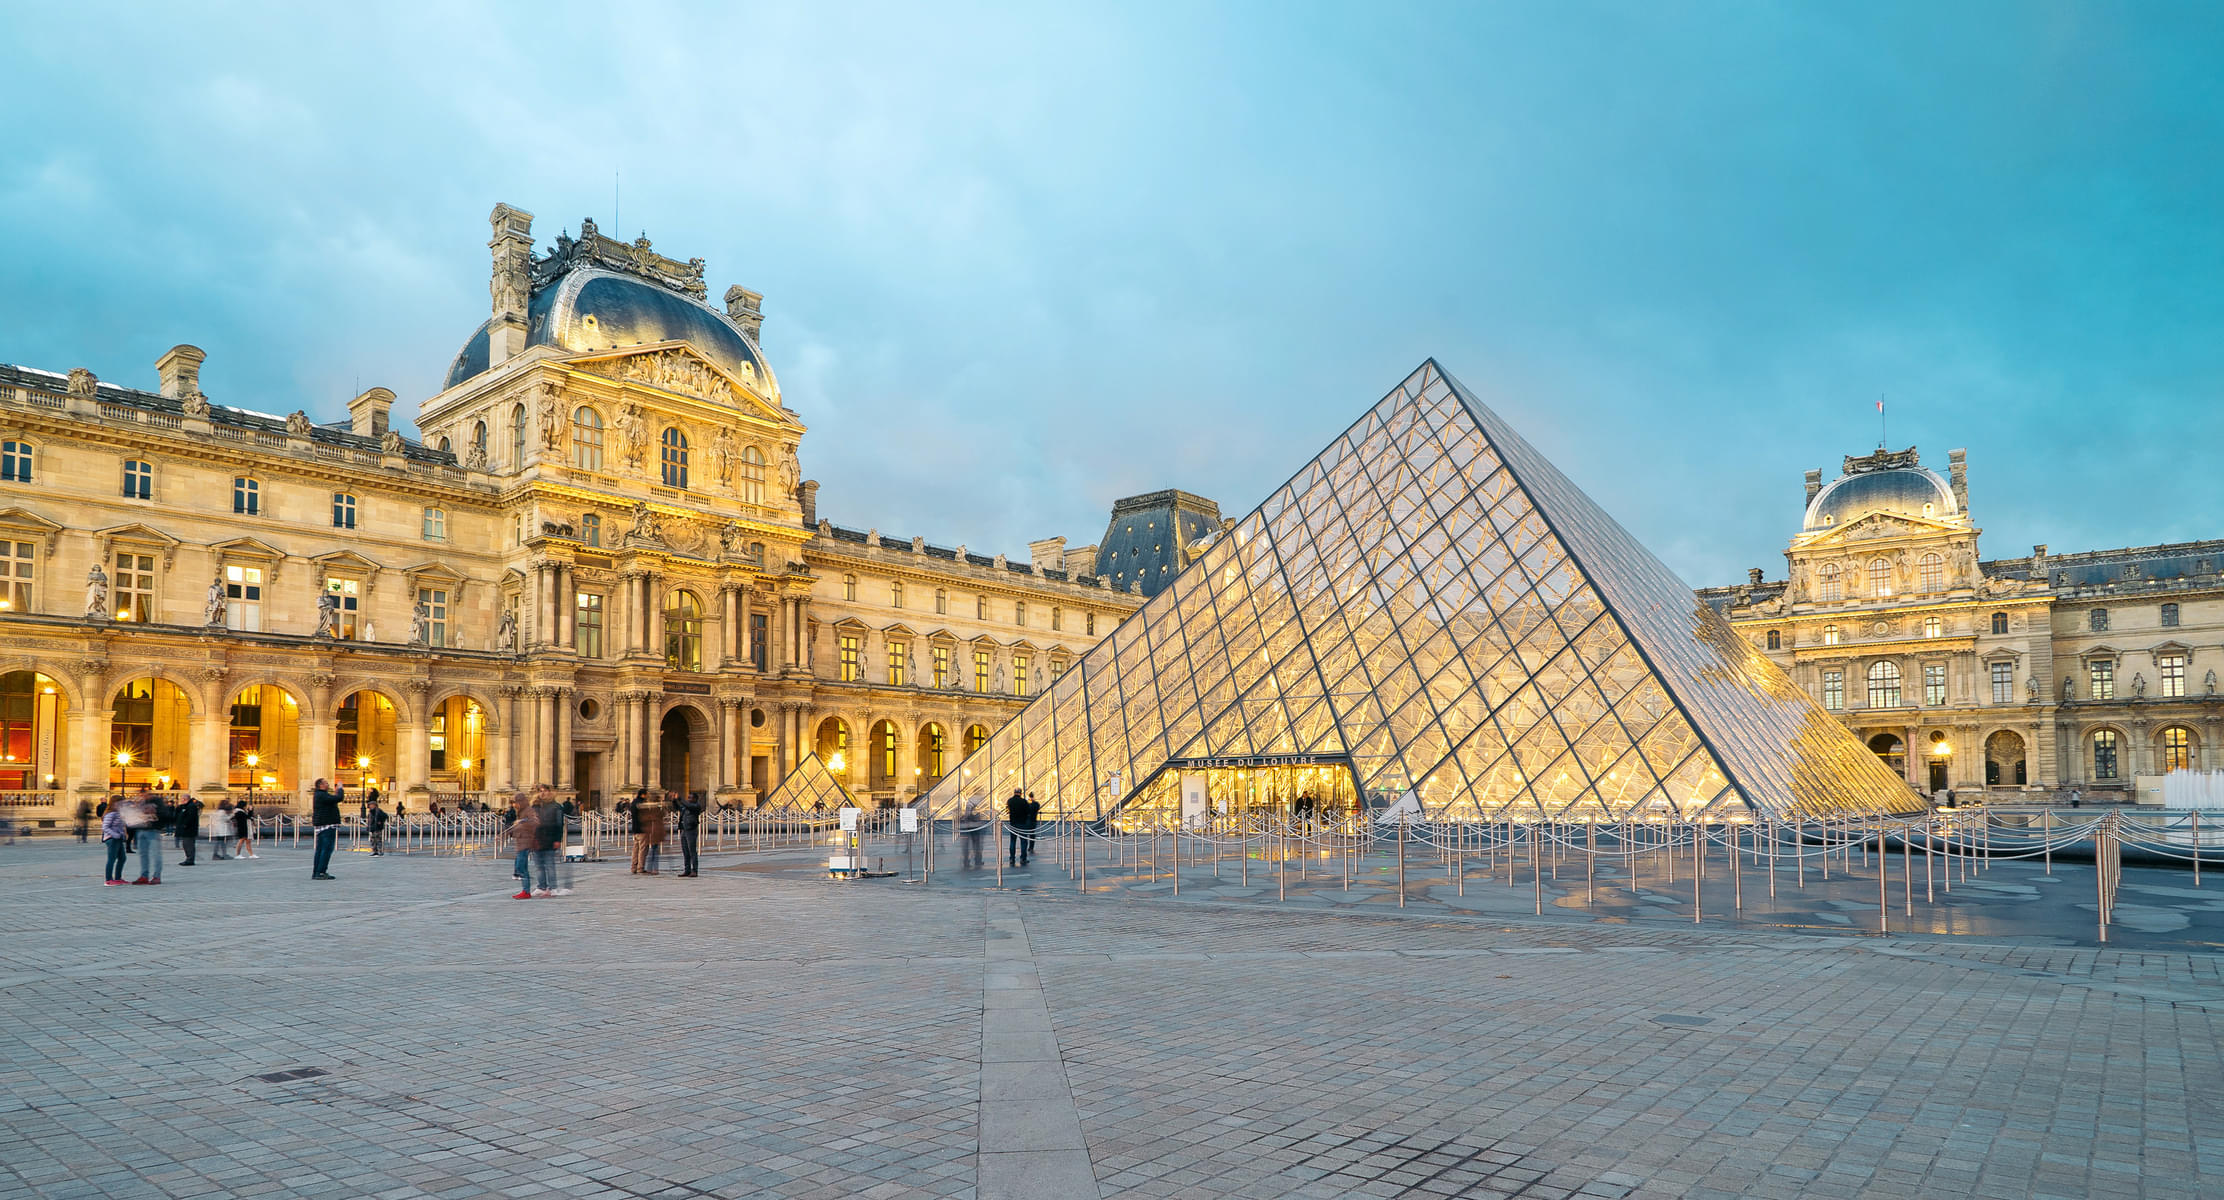 Take a look at the Louvre Pyramid, a striking symbol of artistic legacy and innovation